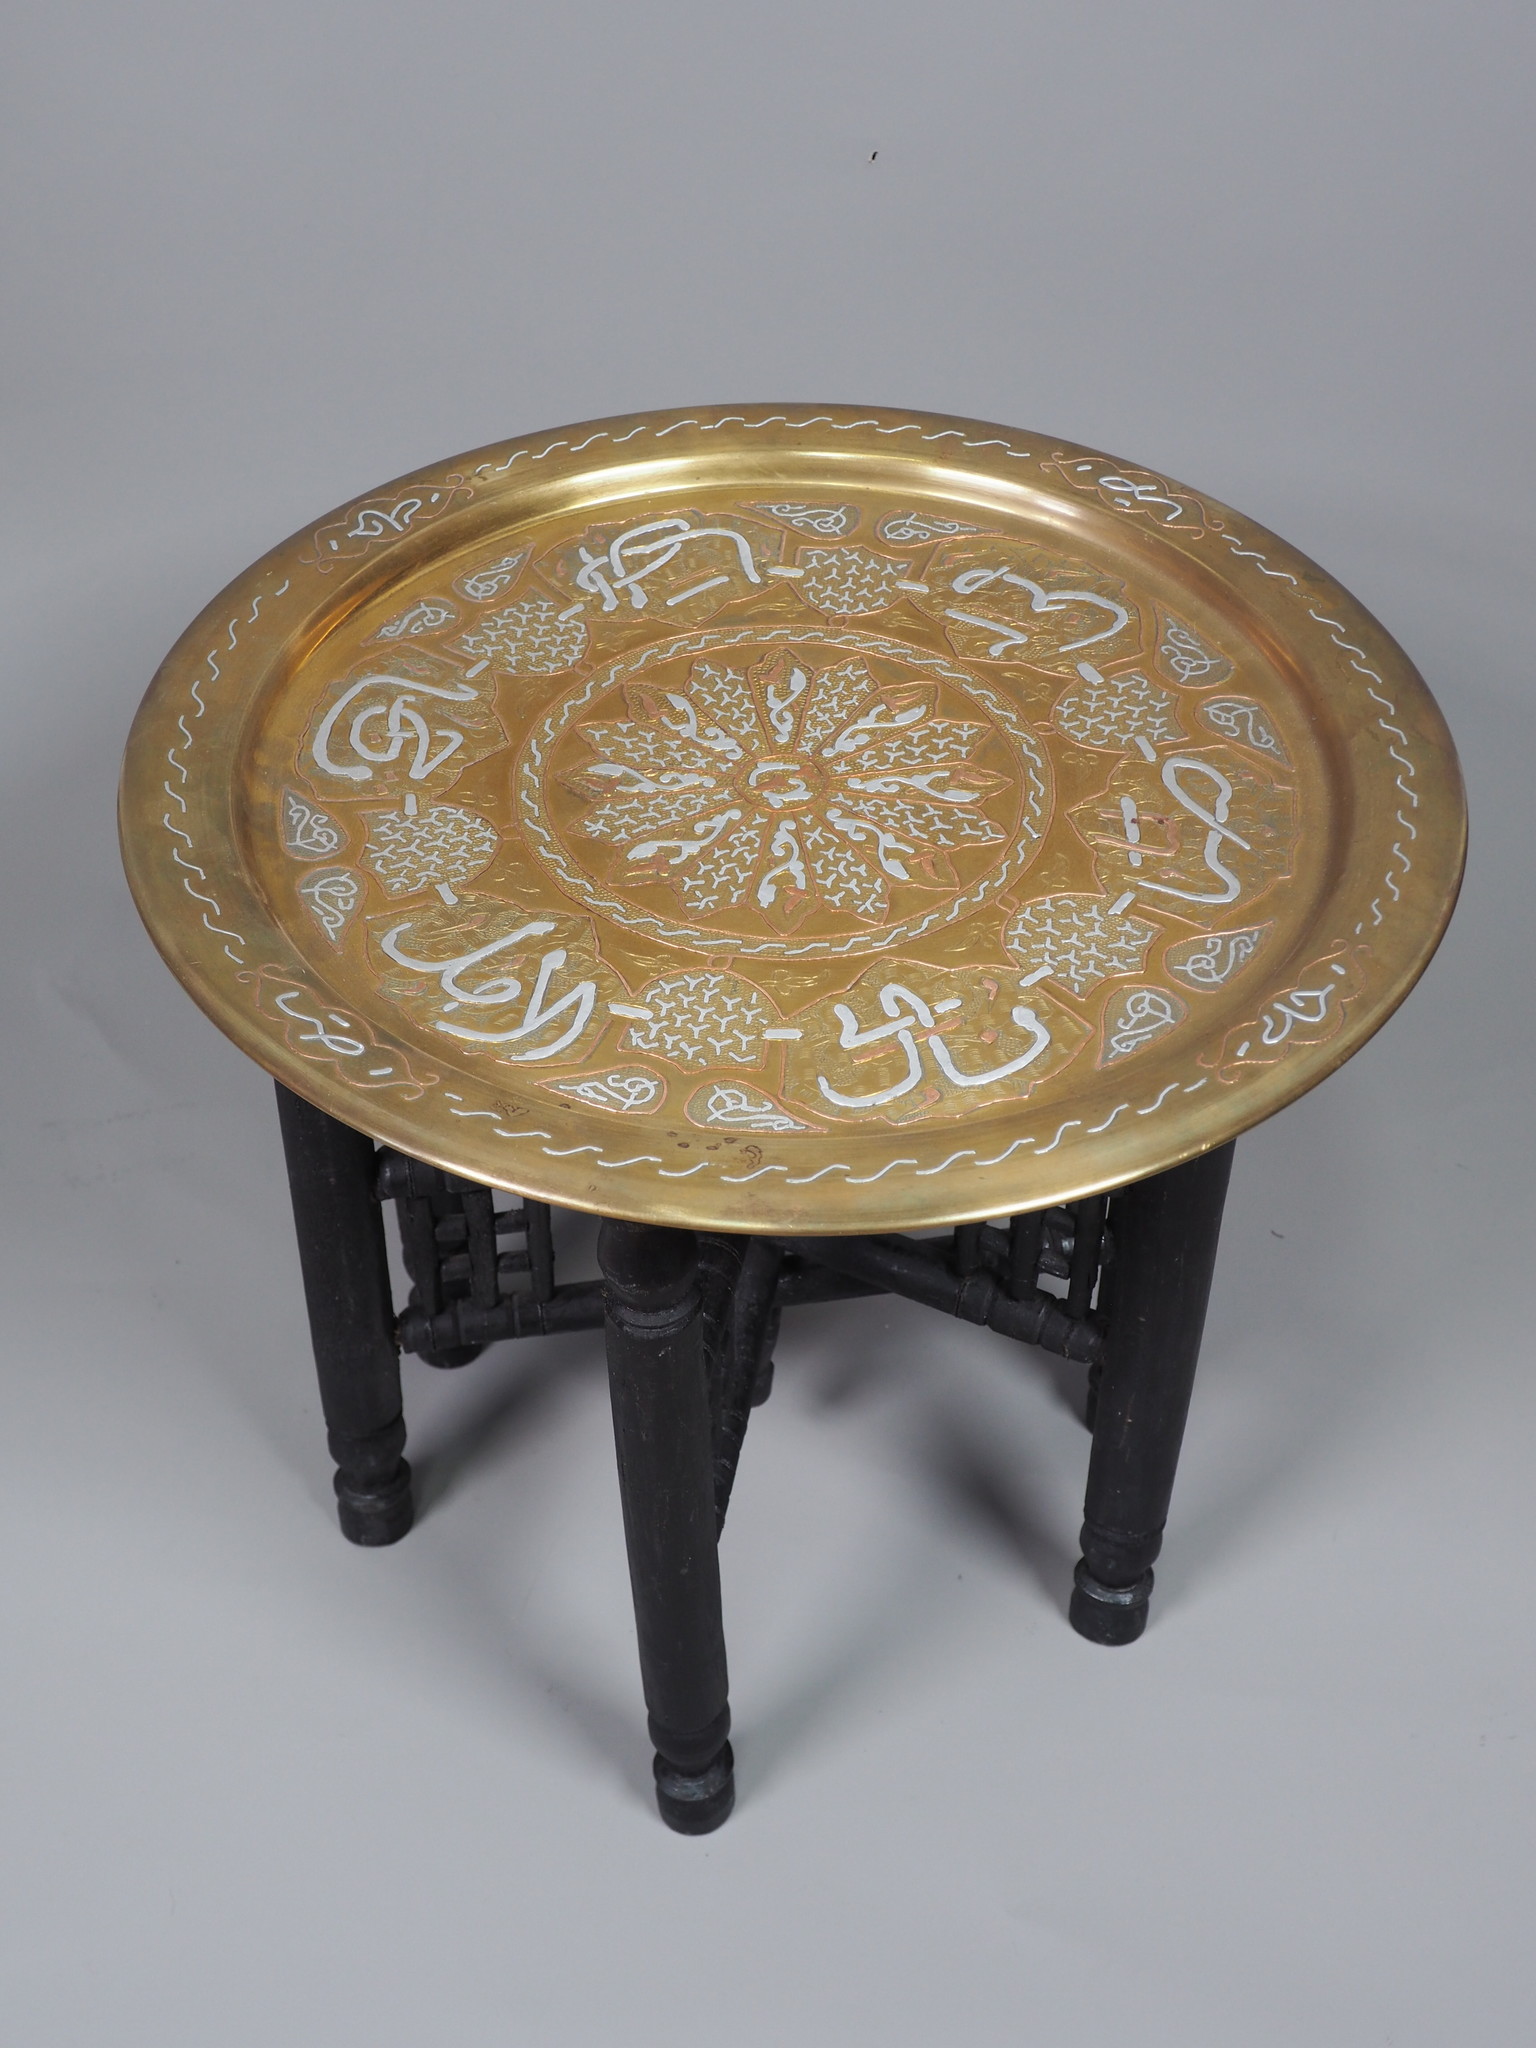 45 cm Antique ottoman orient Islamic  Hammer Engraved Brass table Tray Syria Morocco, Egypt Mamluk Cairoware with arabic calligraphy 21/3